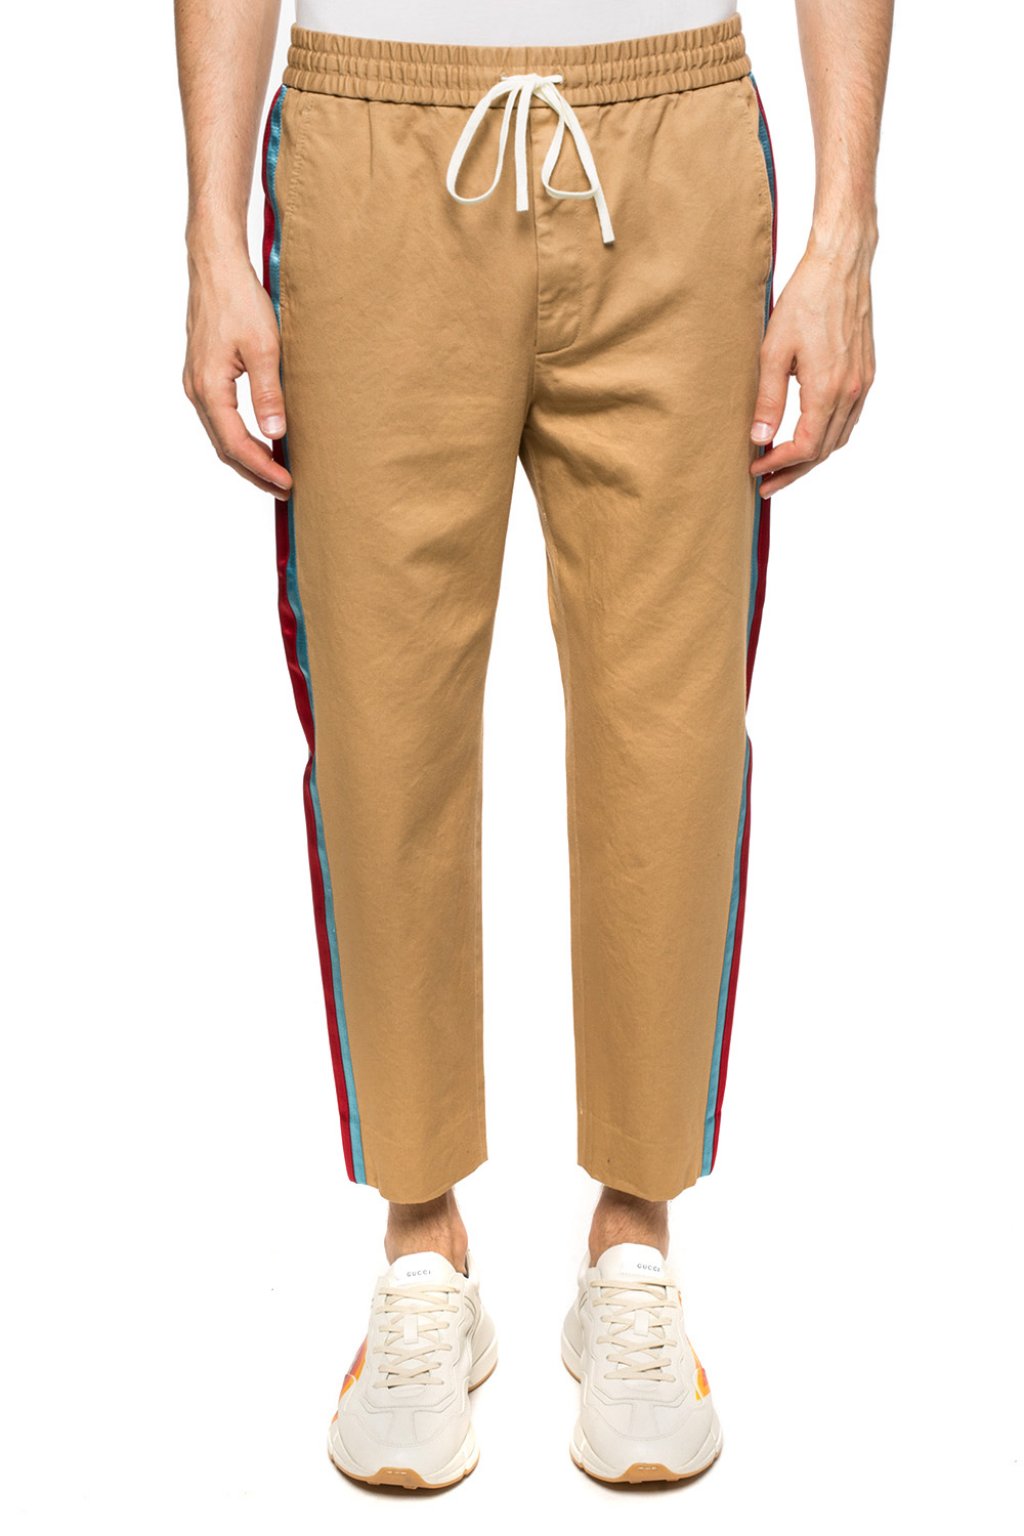 Gucci Stripe Cotton jogging Pants in Gray for Men  Lyst